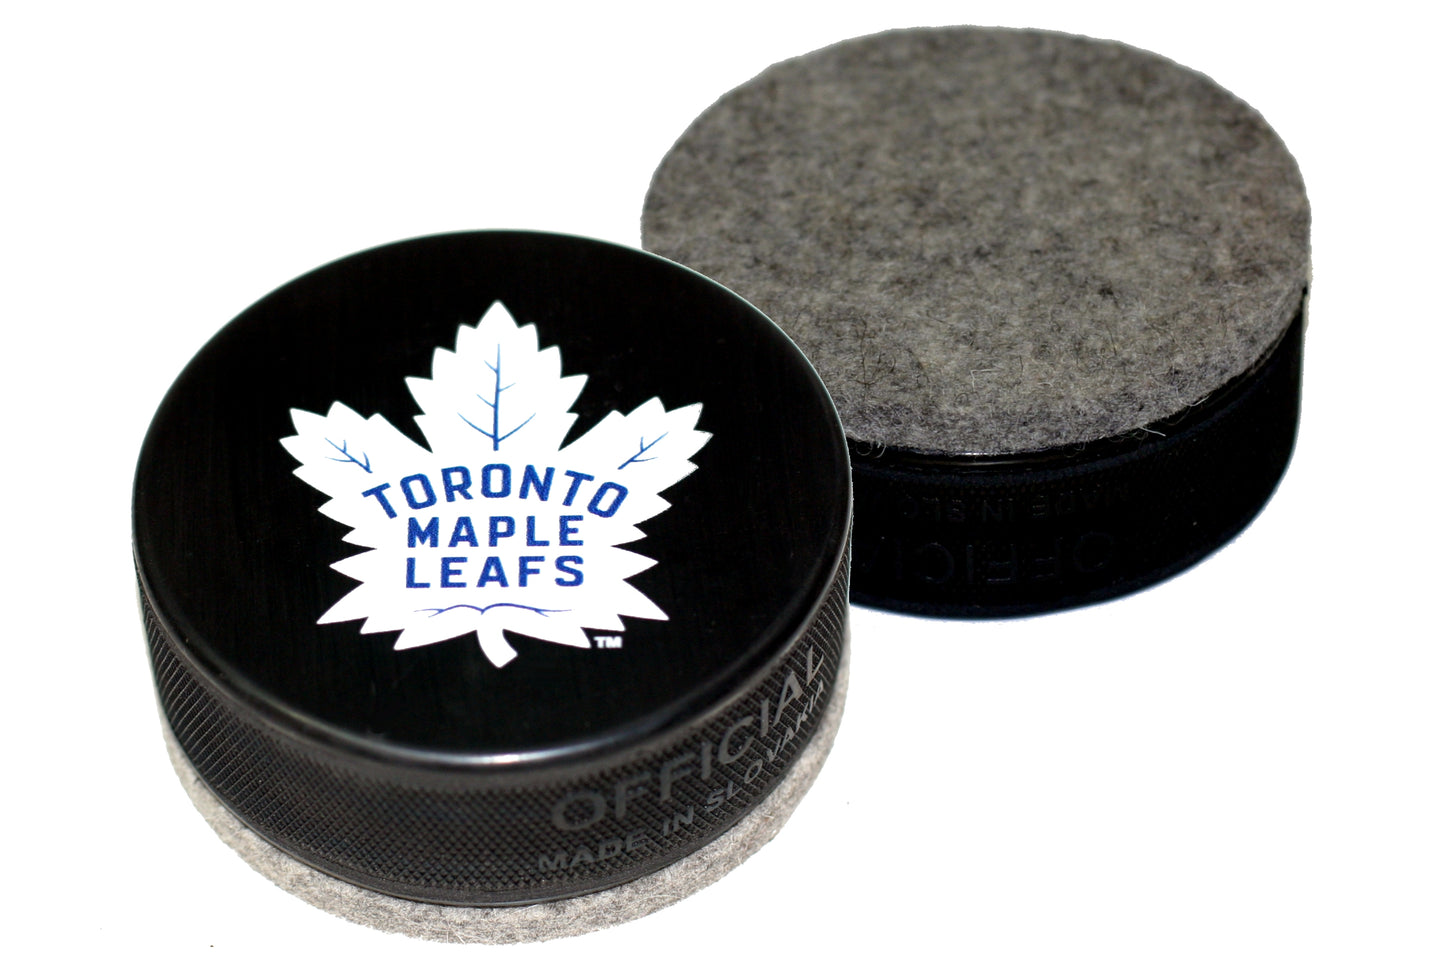 Toronto Maple Leafs Basic Series Hockey Puck Board Eraser For Chalk and Whiteboards